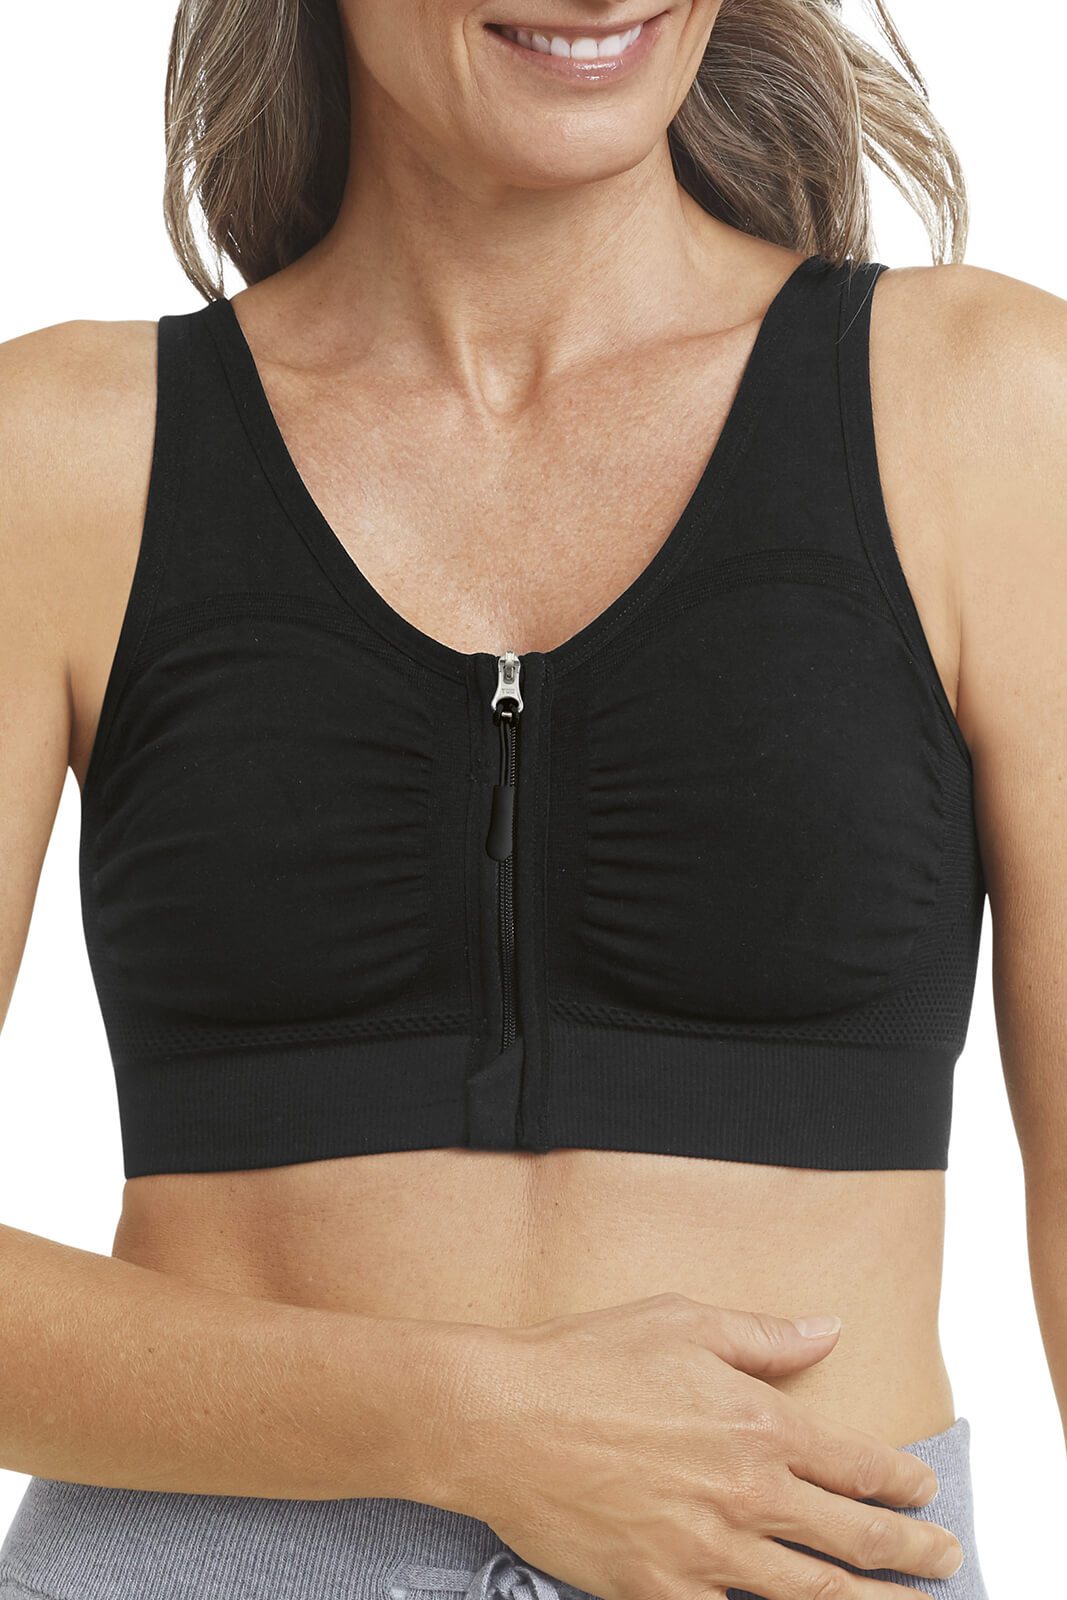 Why You Should Never Workout Without A Sports Bra - Eligible Magazine